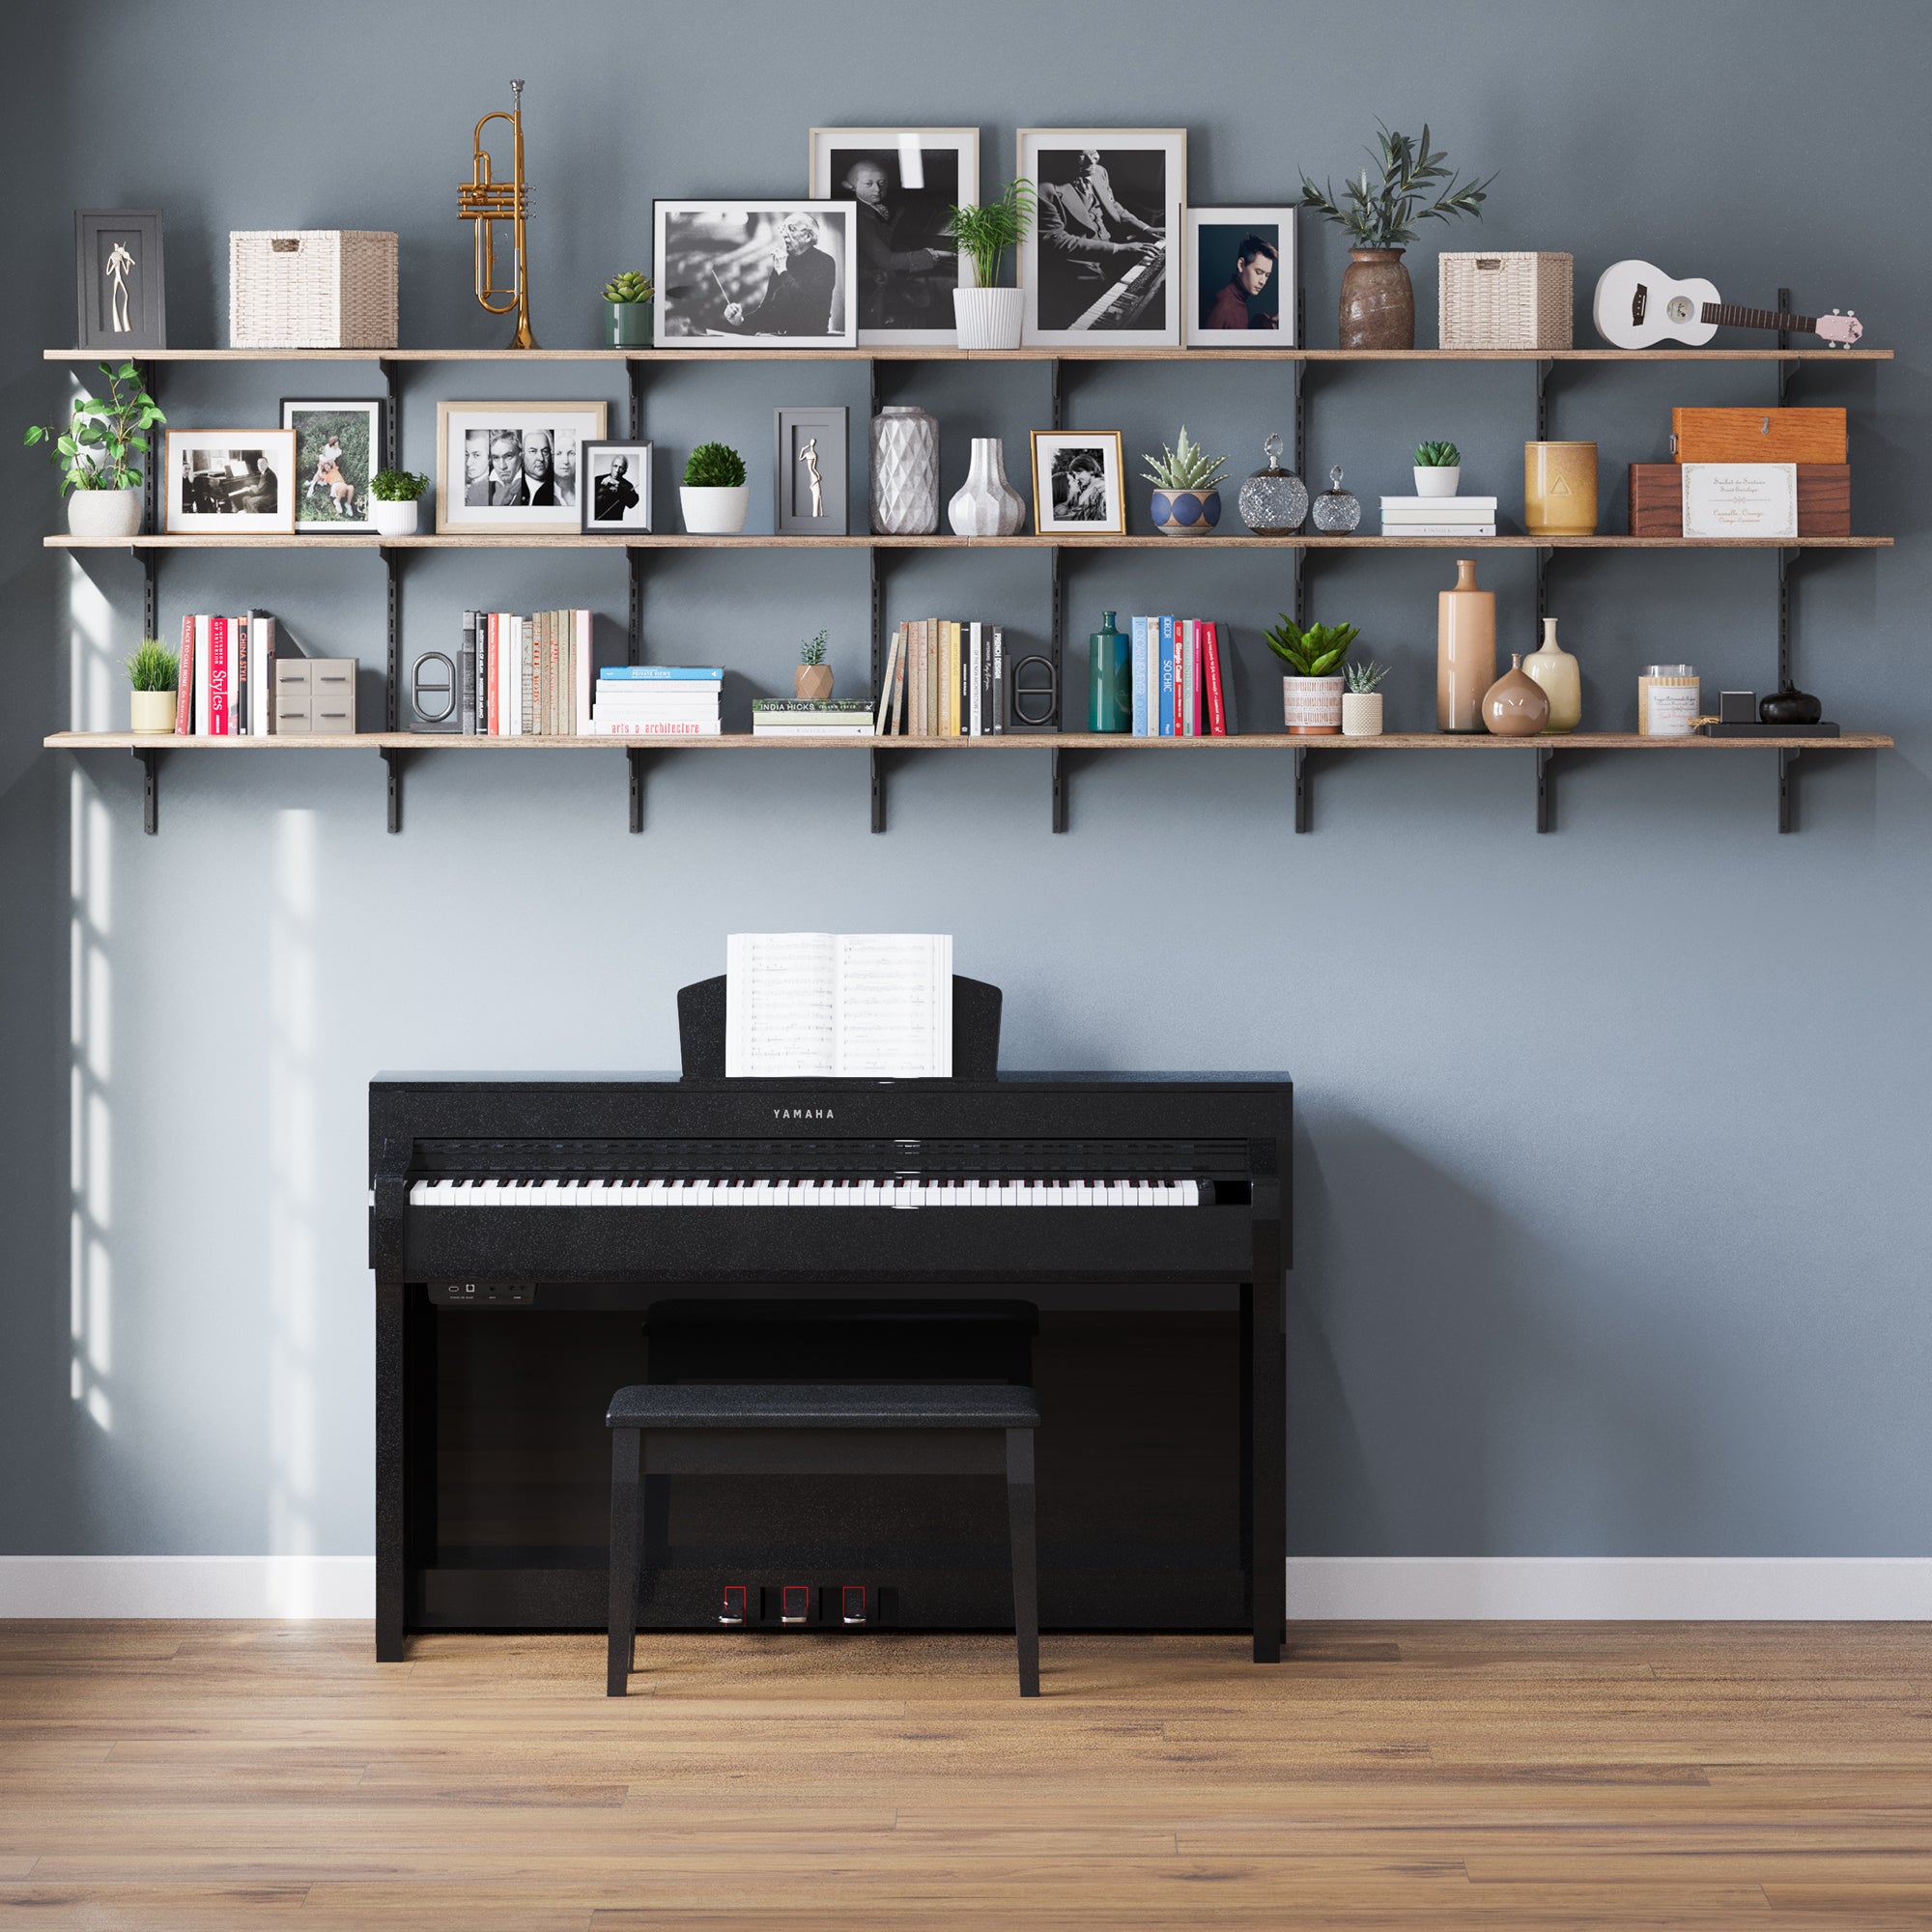 Storage shelving unit burnt with stylish art frames, books and other decorative items above a black piano.